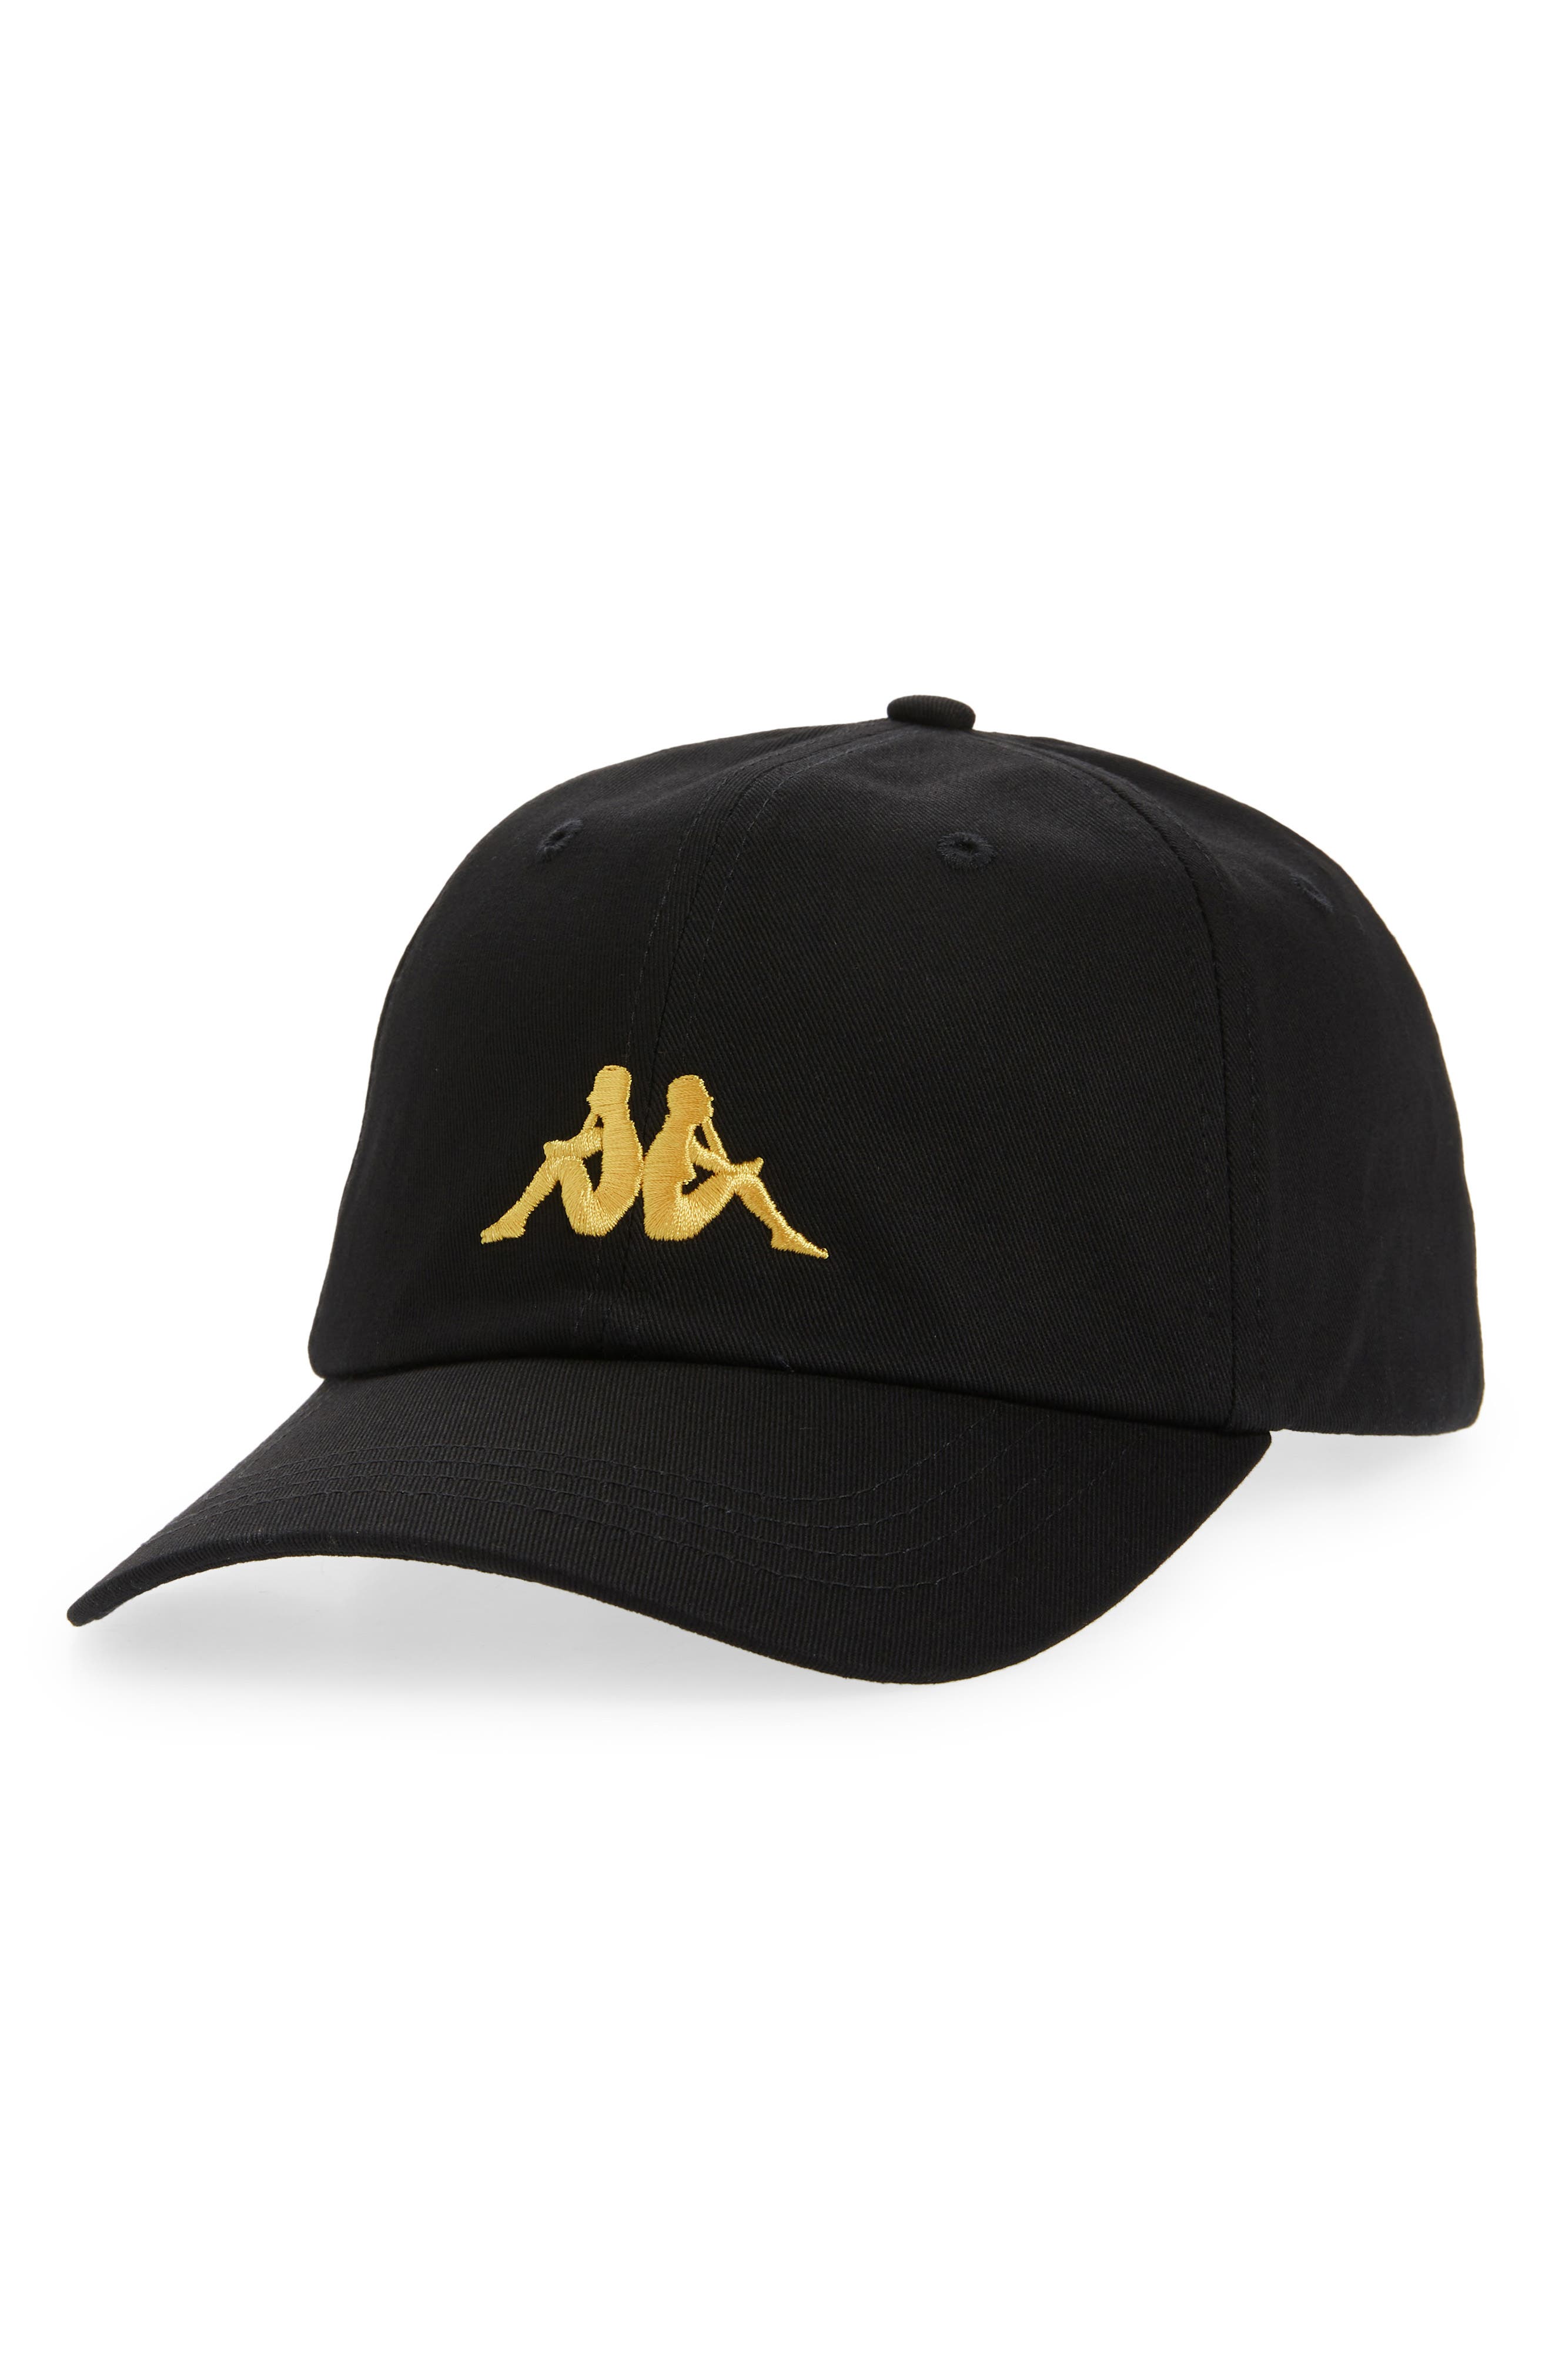 Kappa Authentic Meppel Twill Baseball Cap in Black Smoke/Yellow/White at Nordstrom